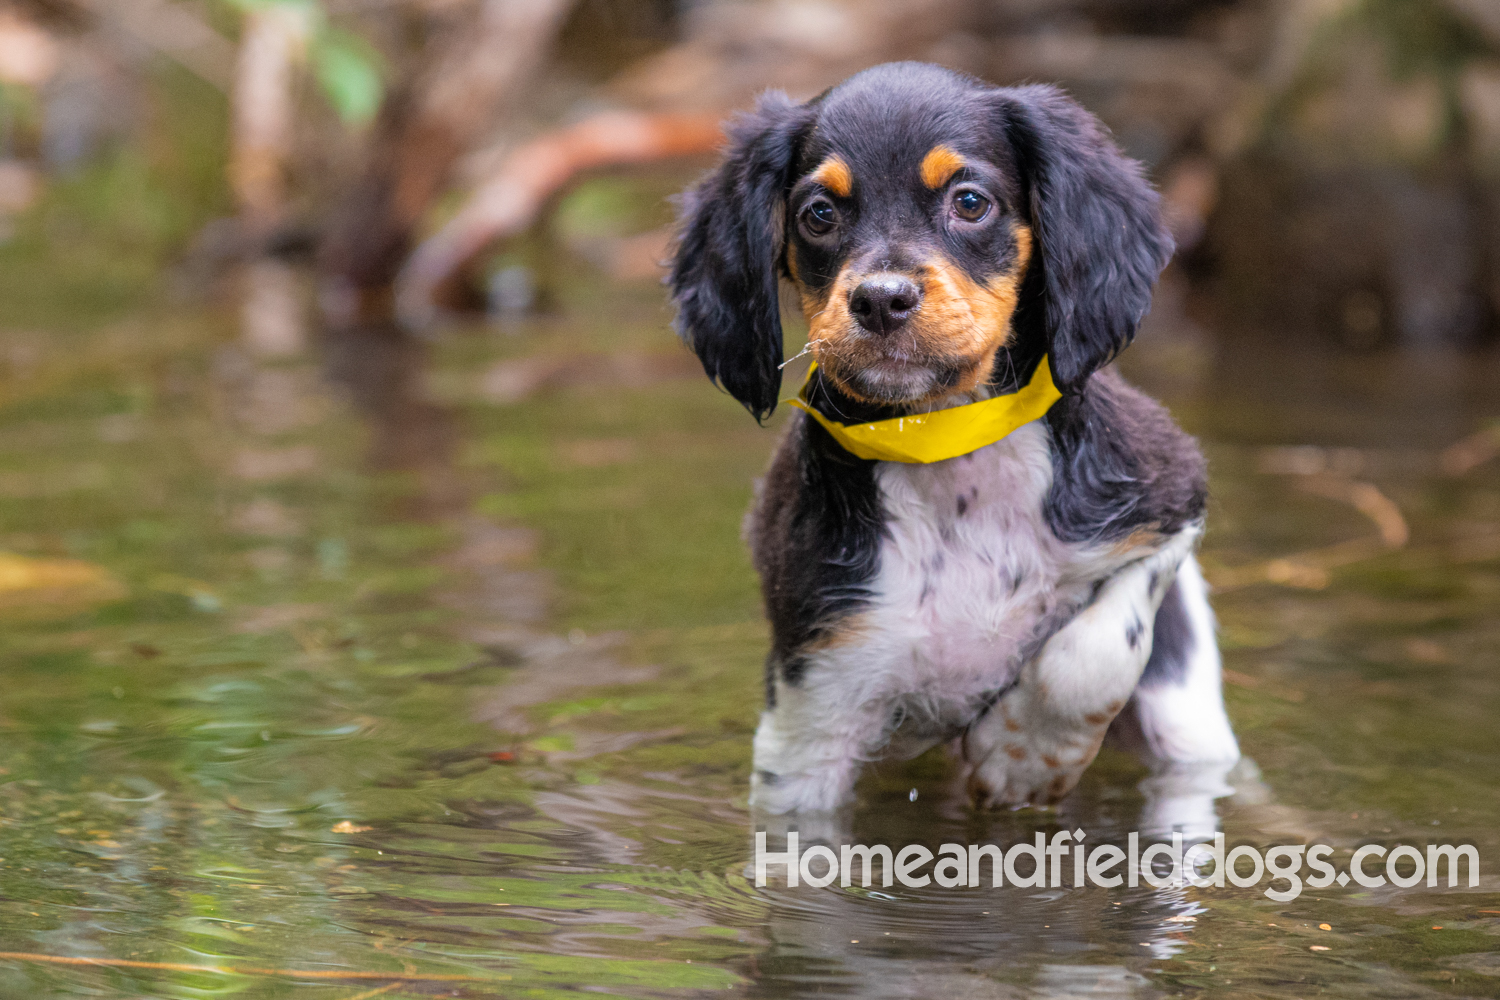 Photo album of a French Brittany puppy playing with sticks in the park and playing in the river